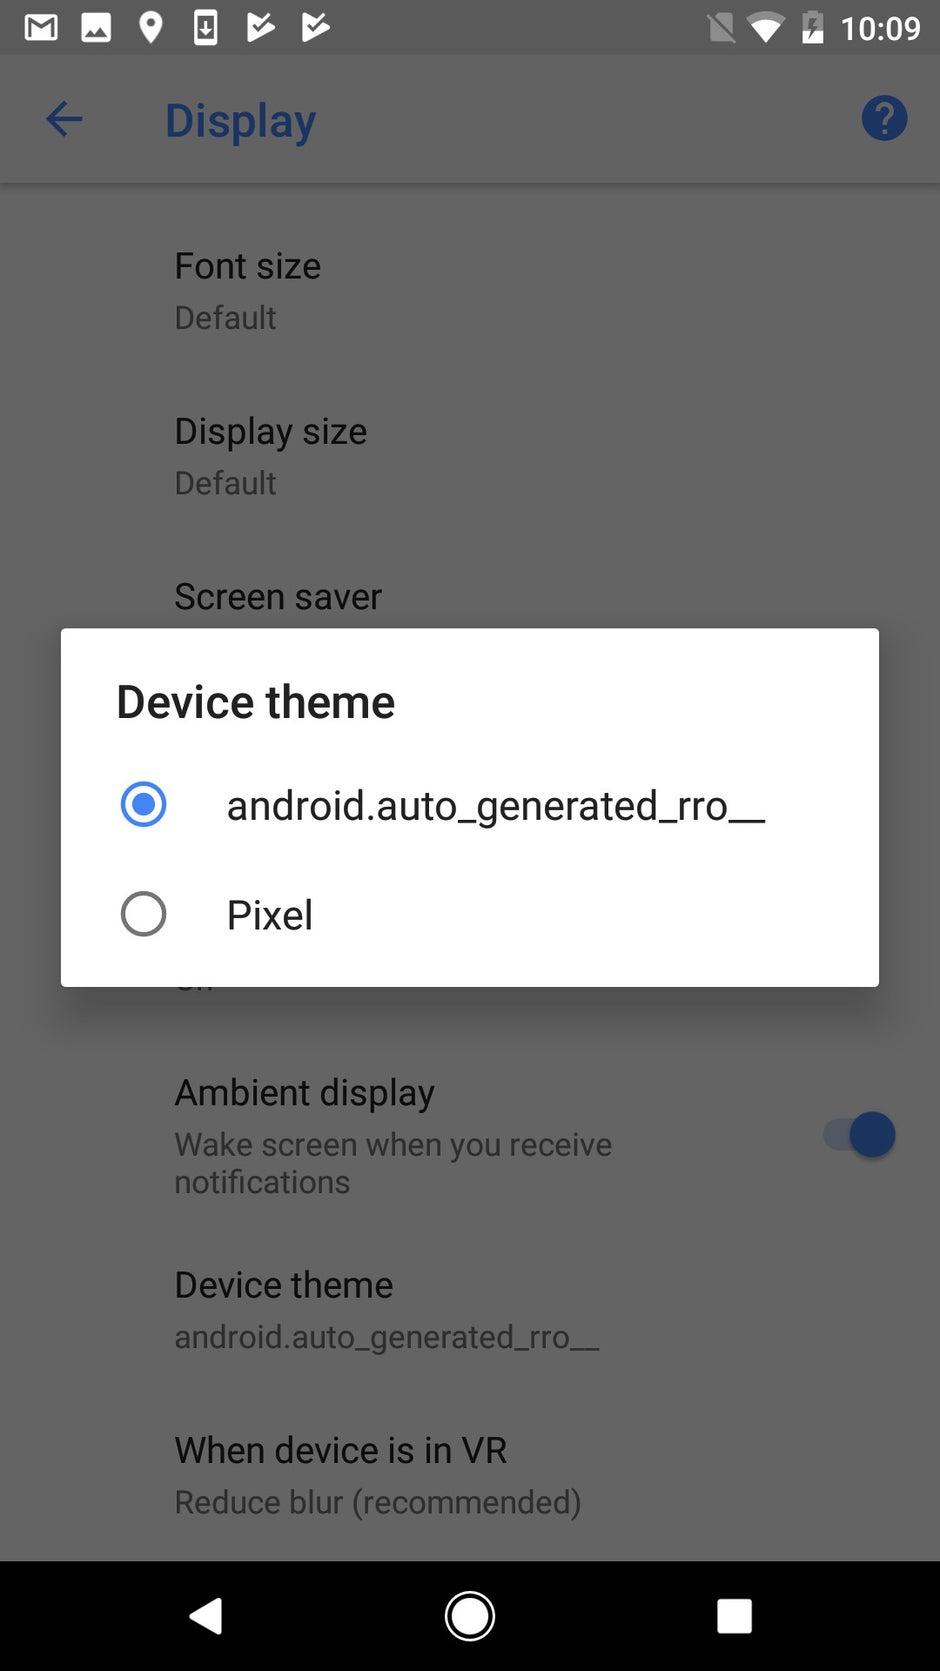 New theming options in Android O Developer Preview 2 - Android O may get support for custom themes in the final release